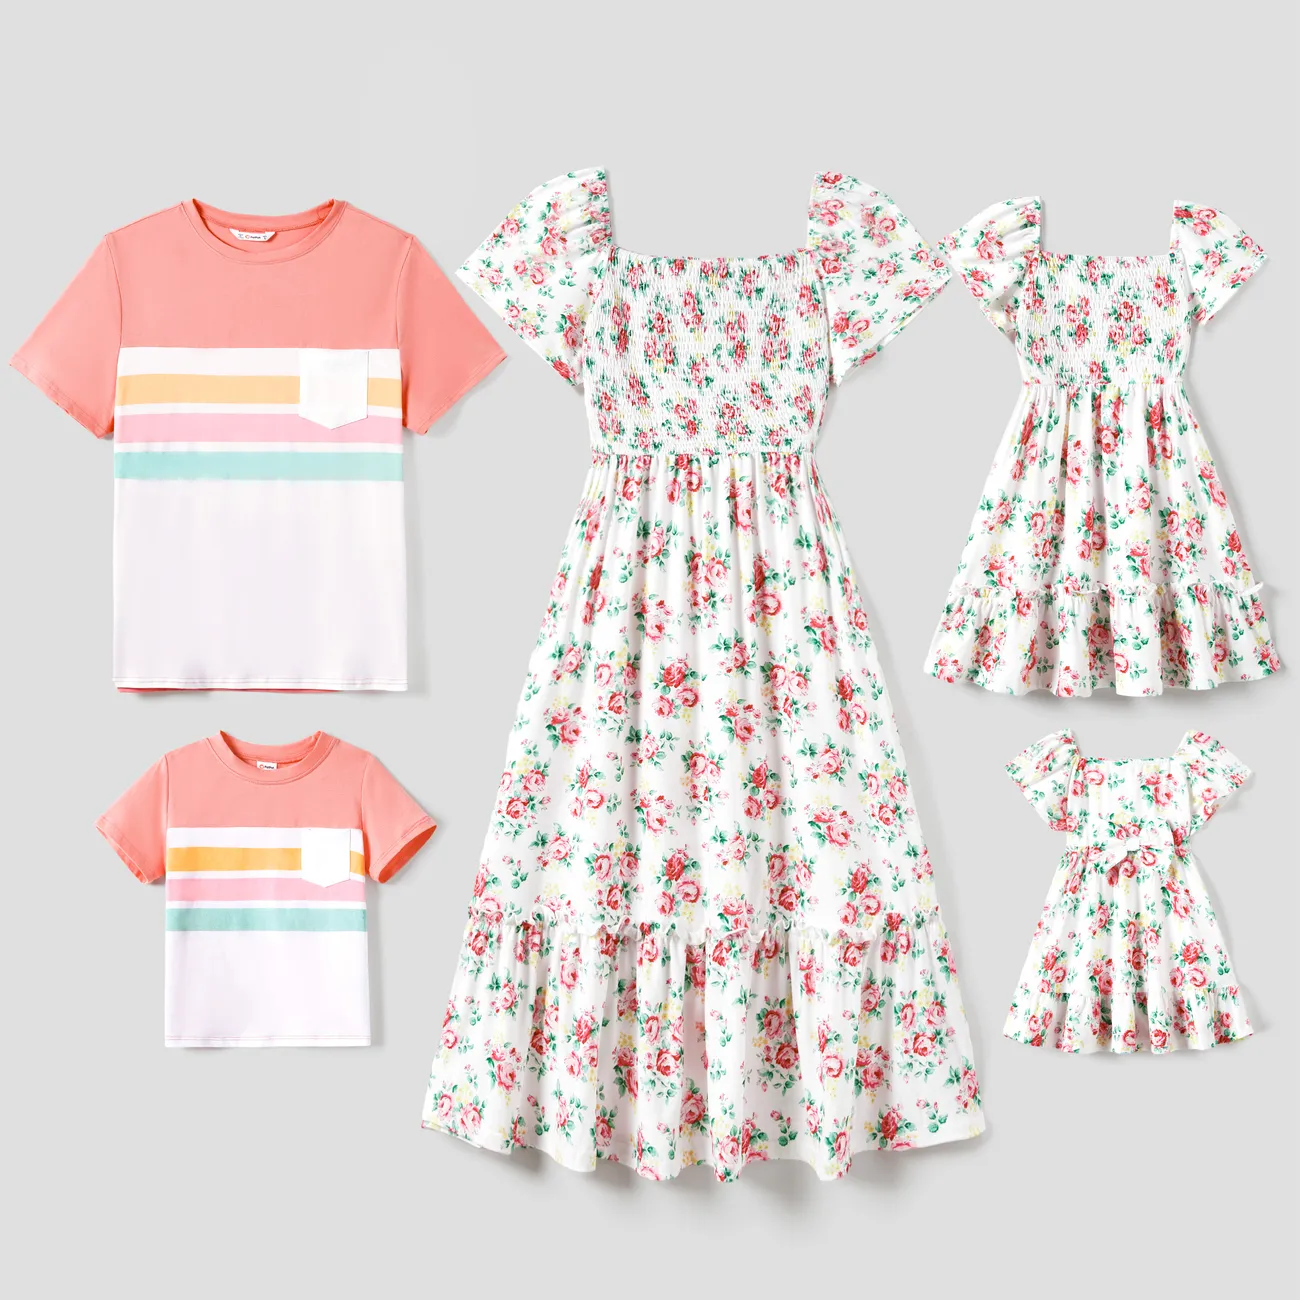 Family Matching Color Block Tee and Ditsy Floral Shirred Top Dress Sets Pink big image 1